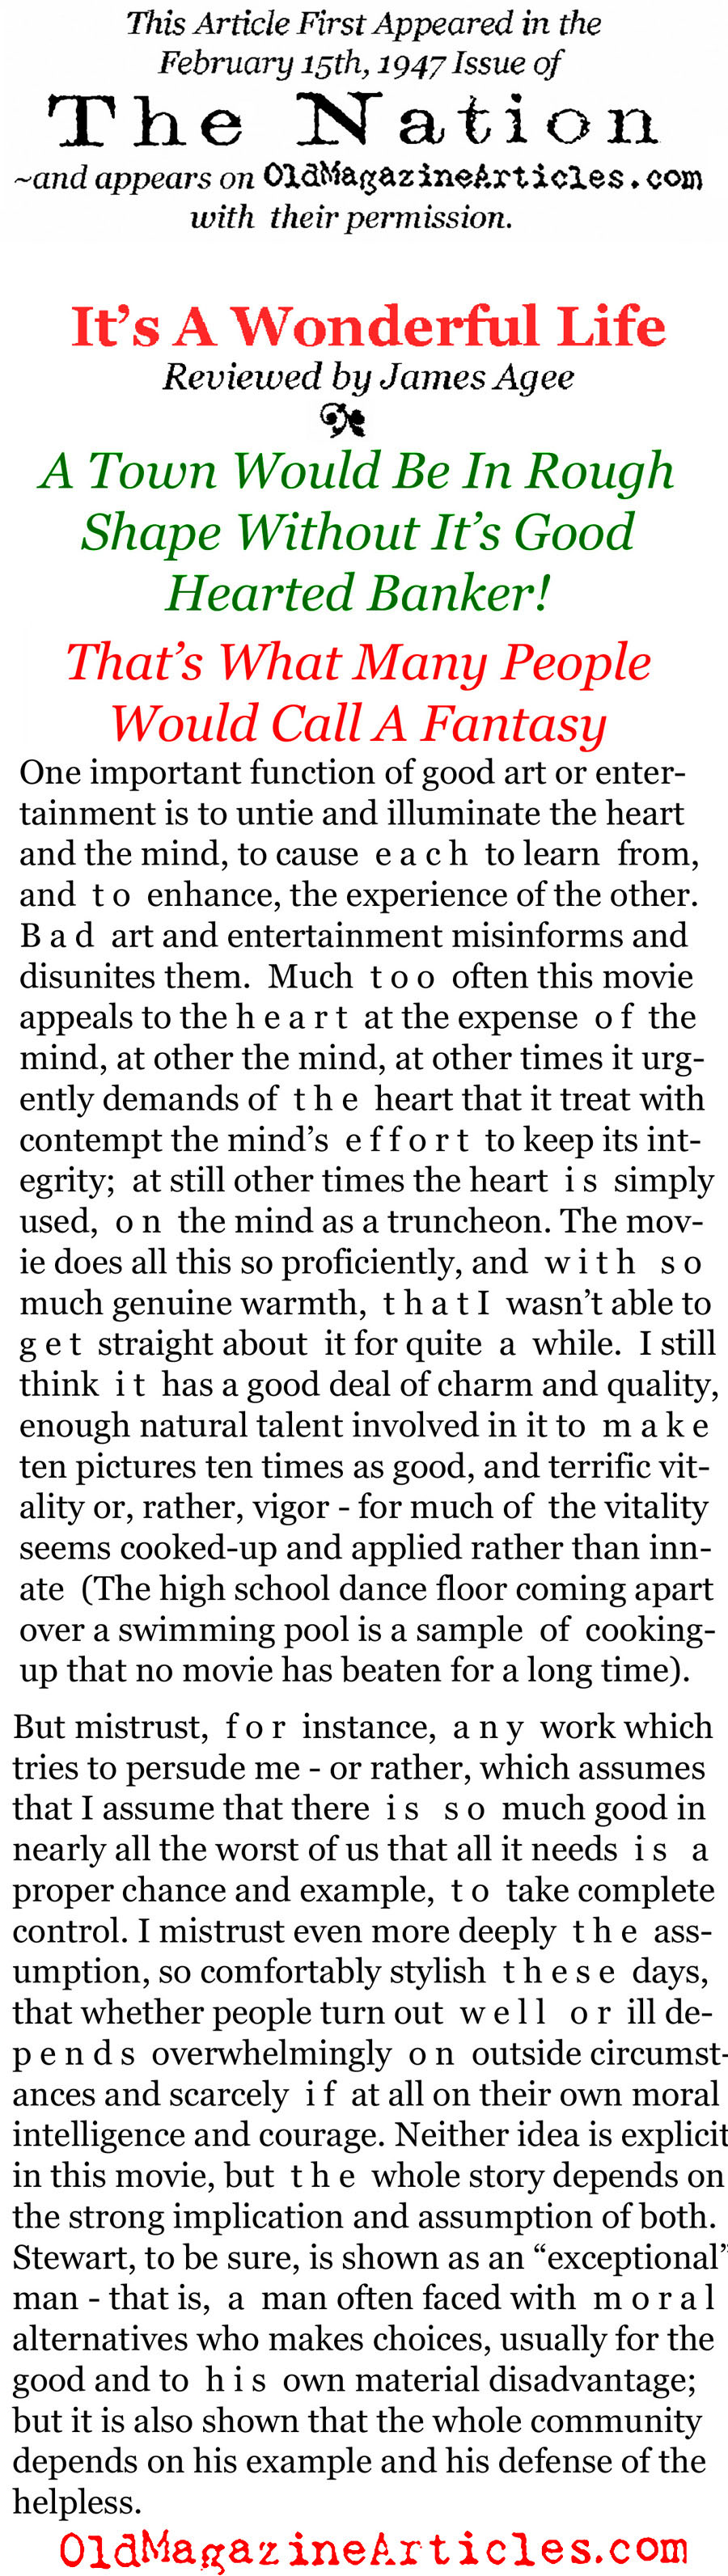 A Leftist Review of <i>It's a Wonderful Life</i> (The Nation, 1947)